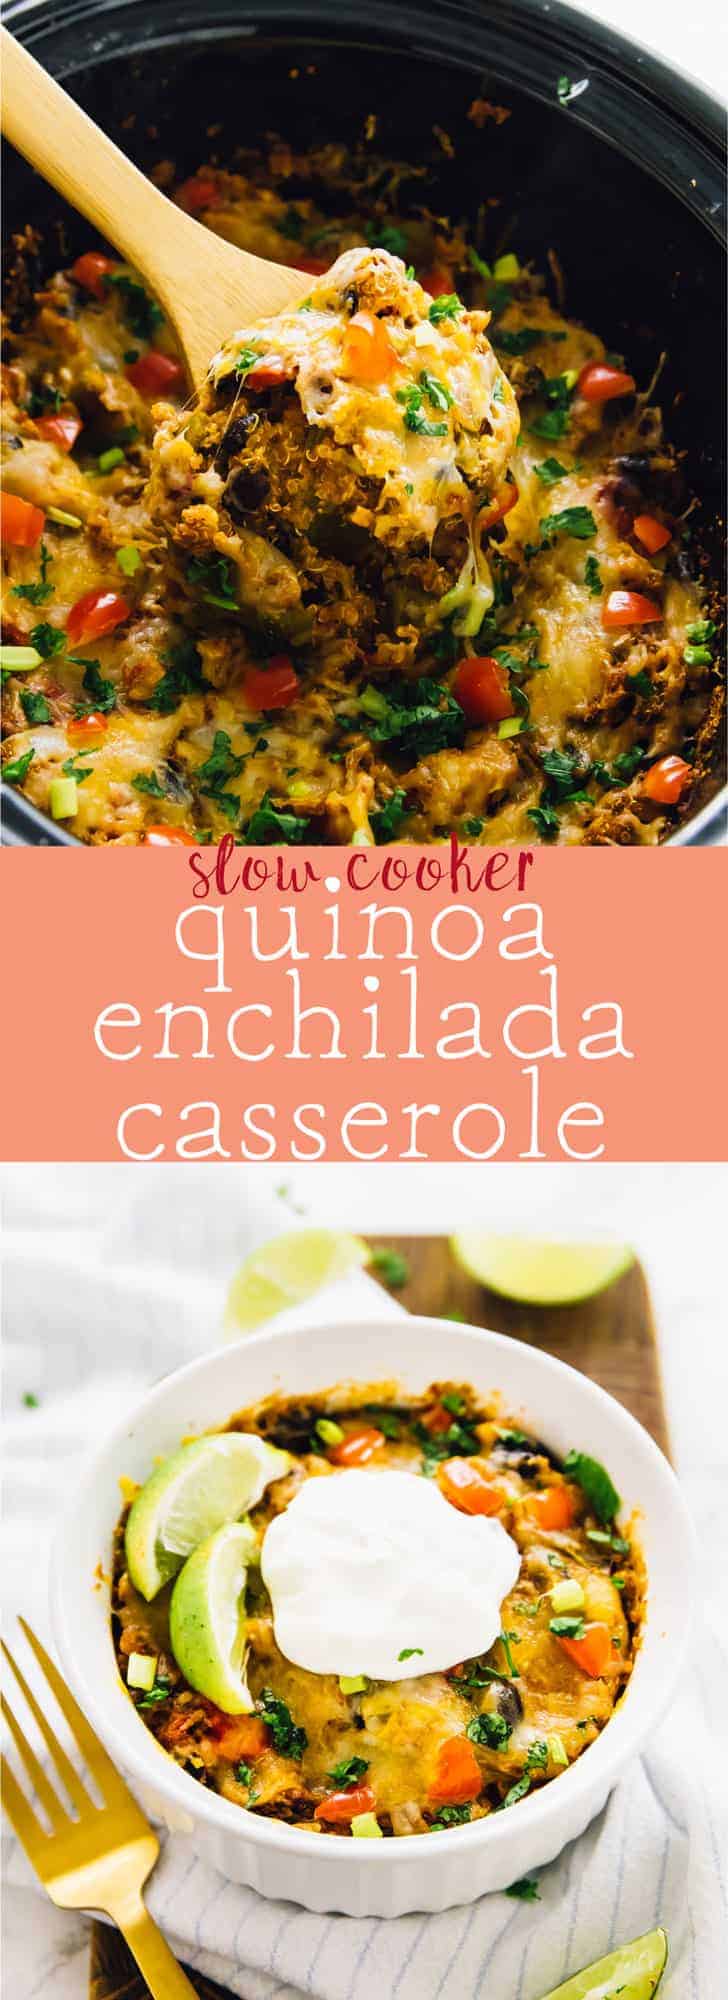 This healthy Slow Cooker Quinoa Enchilada Casserole takes only 15 minutes of prep, then add it all into the slow cooker! It's filling, serves lots of leftover and is bursting with flavour! via https://jessicainthekitchen.com